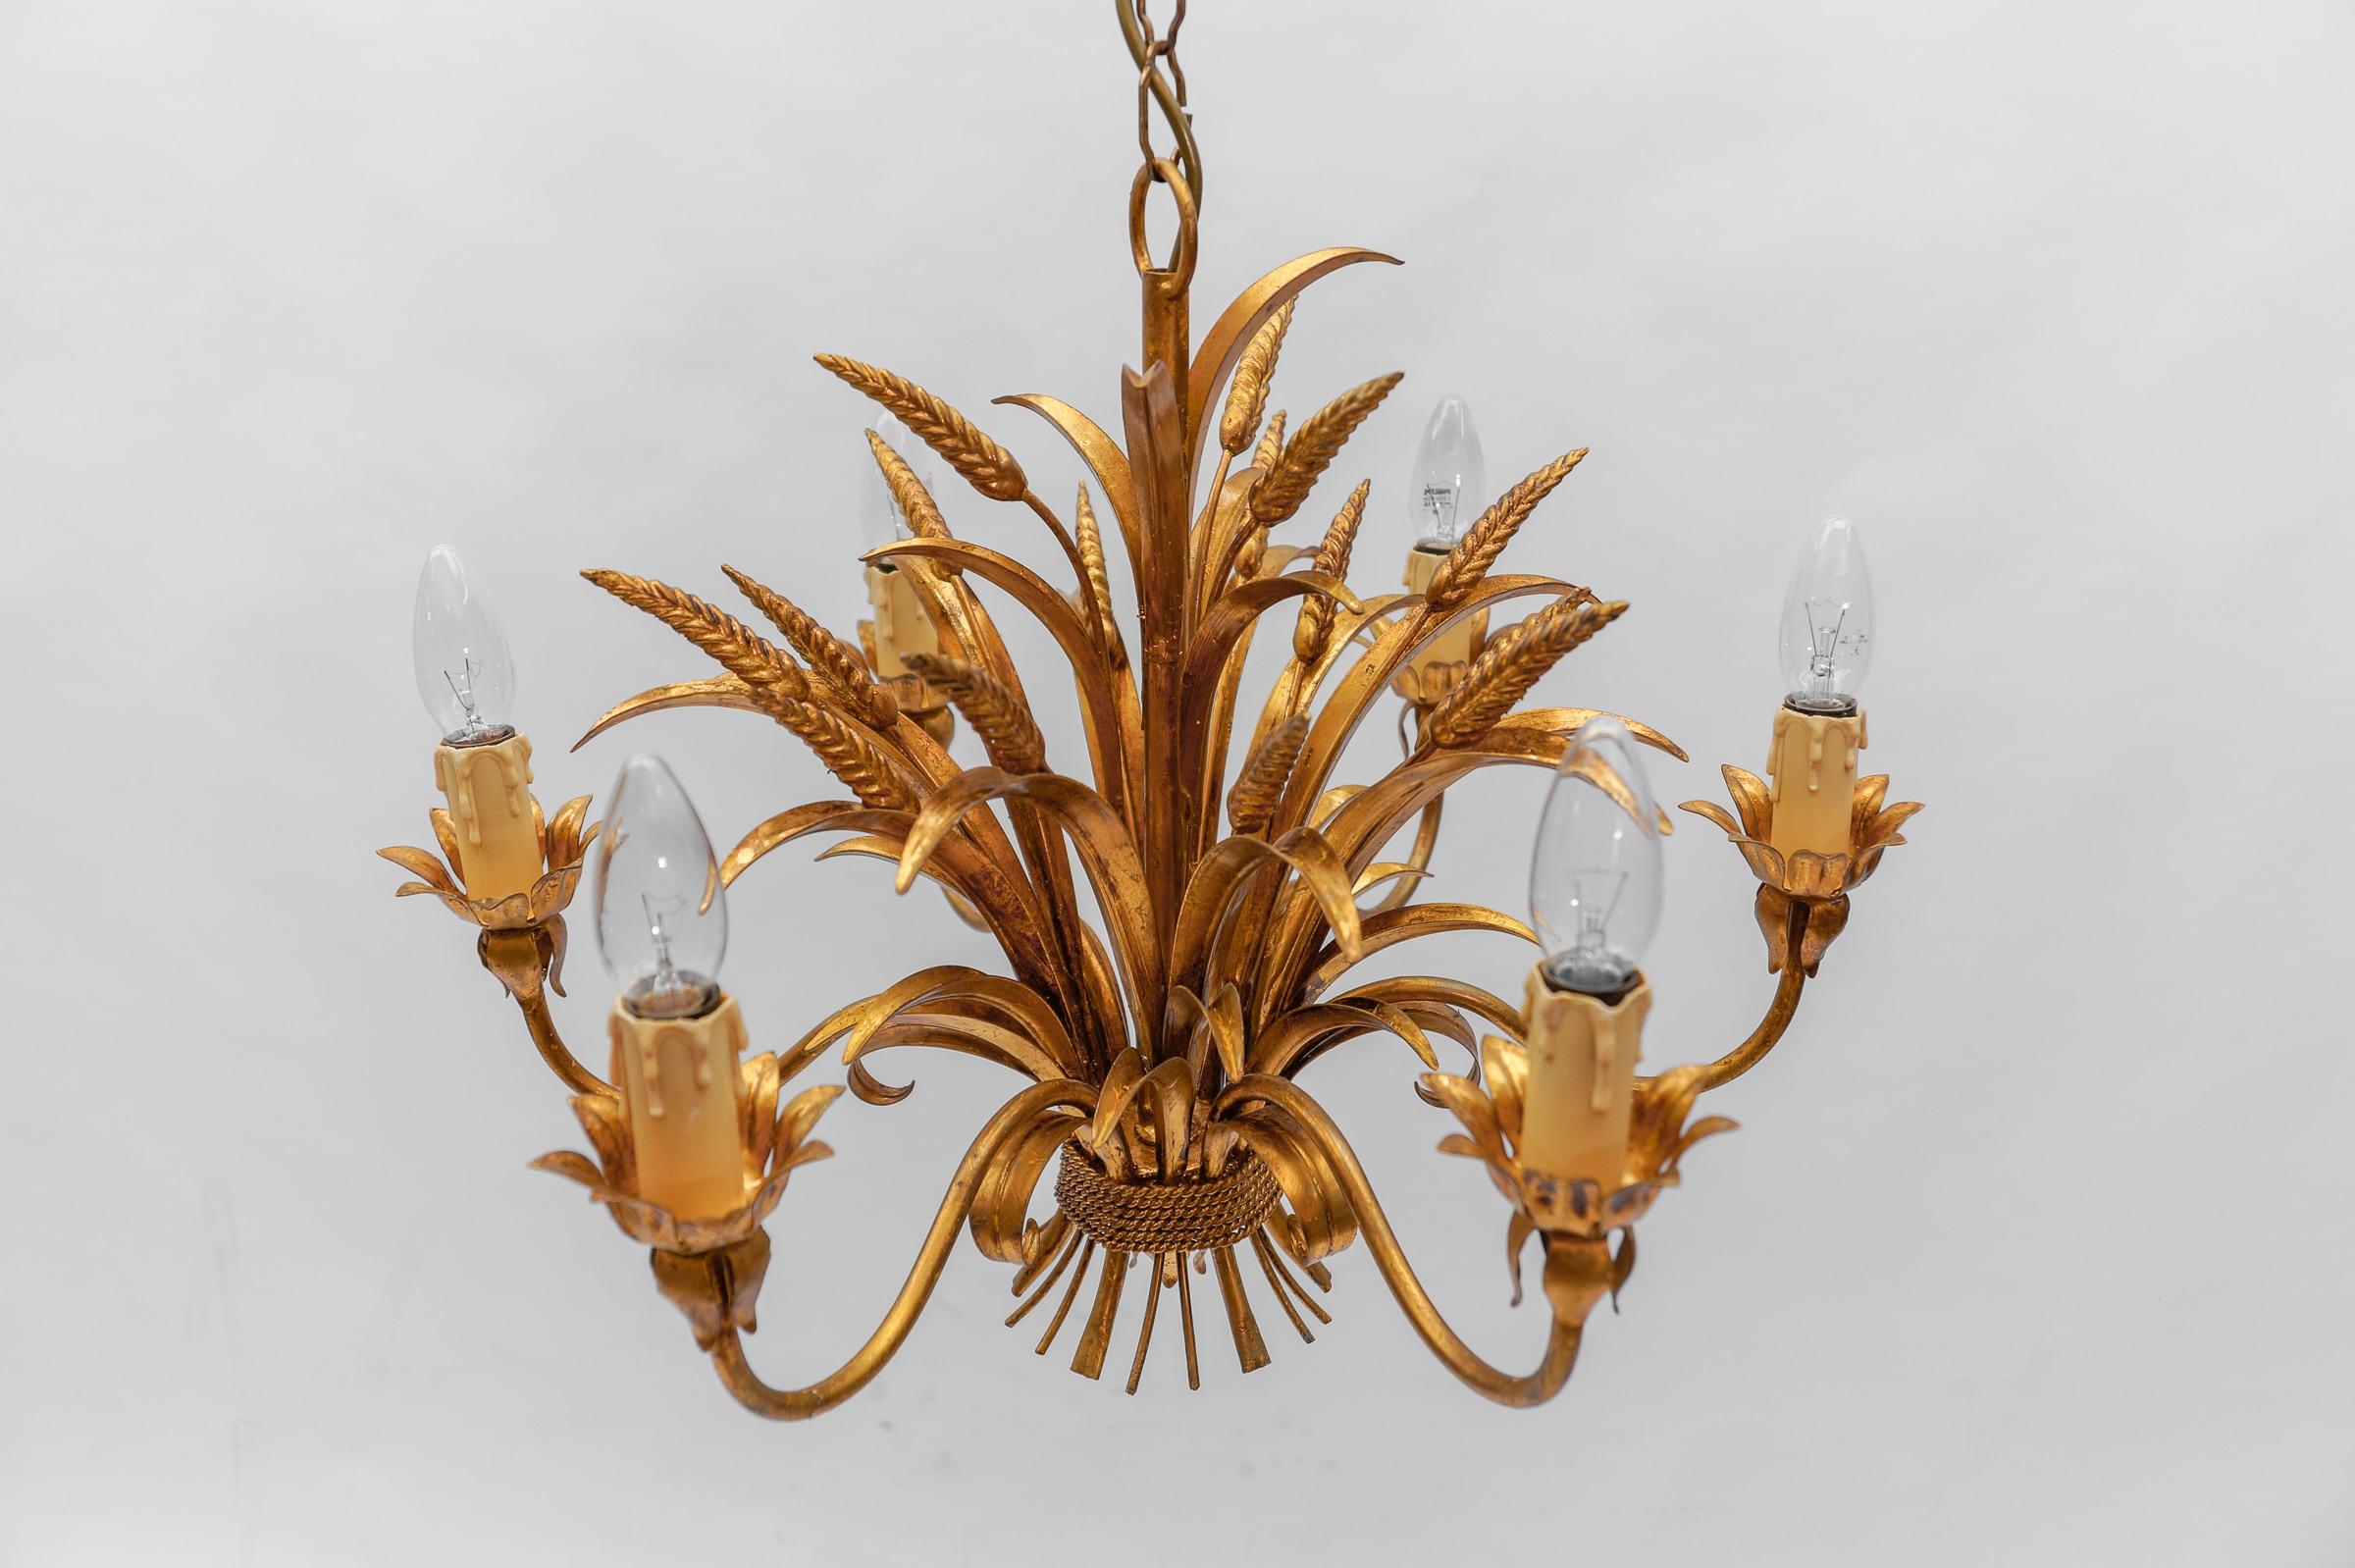 Large Wheat Sheaf Ceiling Light by Hans Kögl, Germany, 1970s For Sale 1